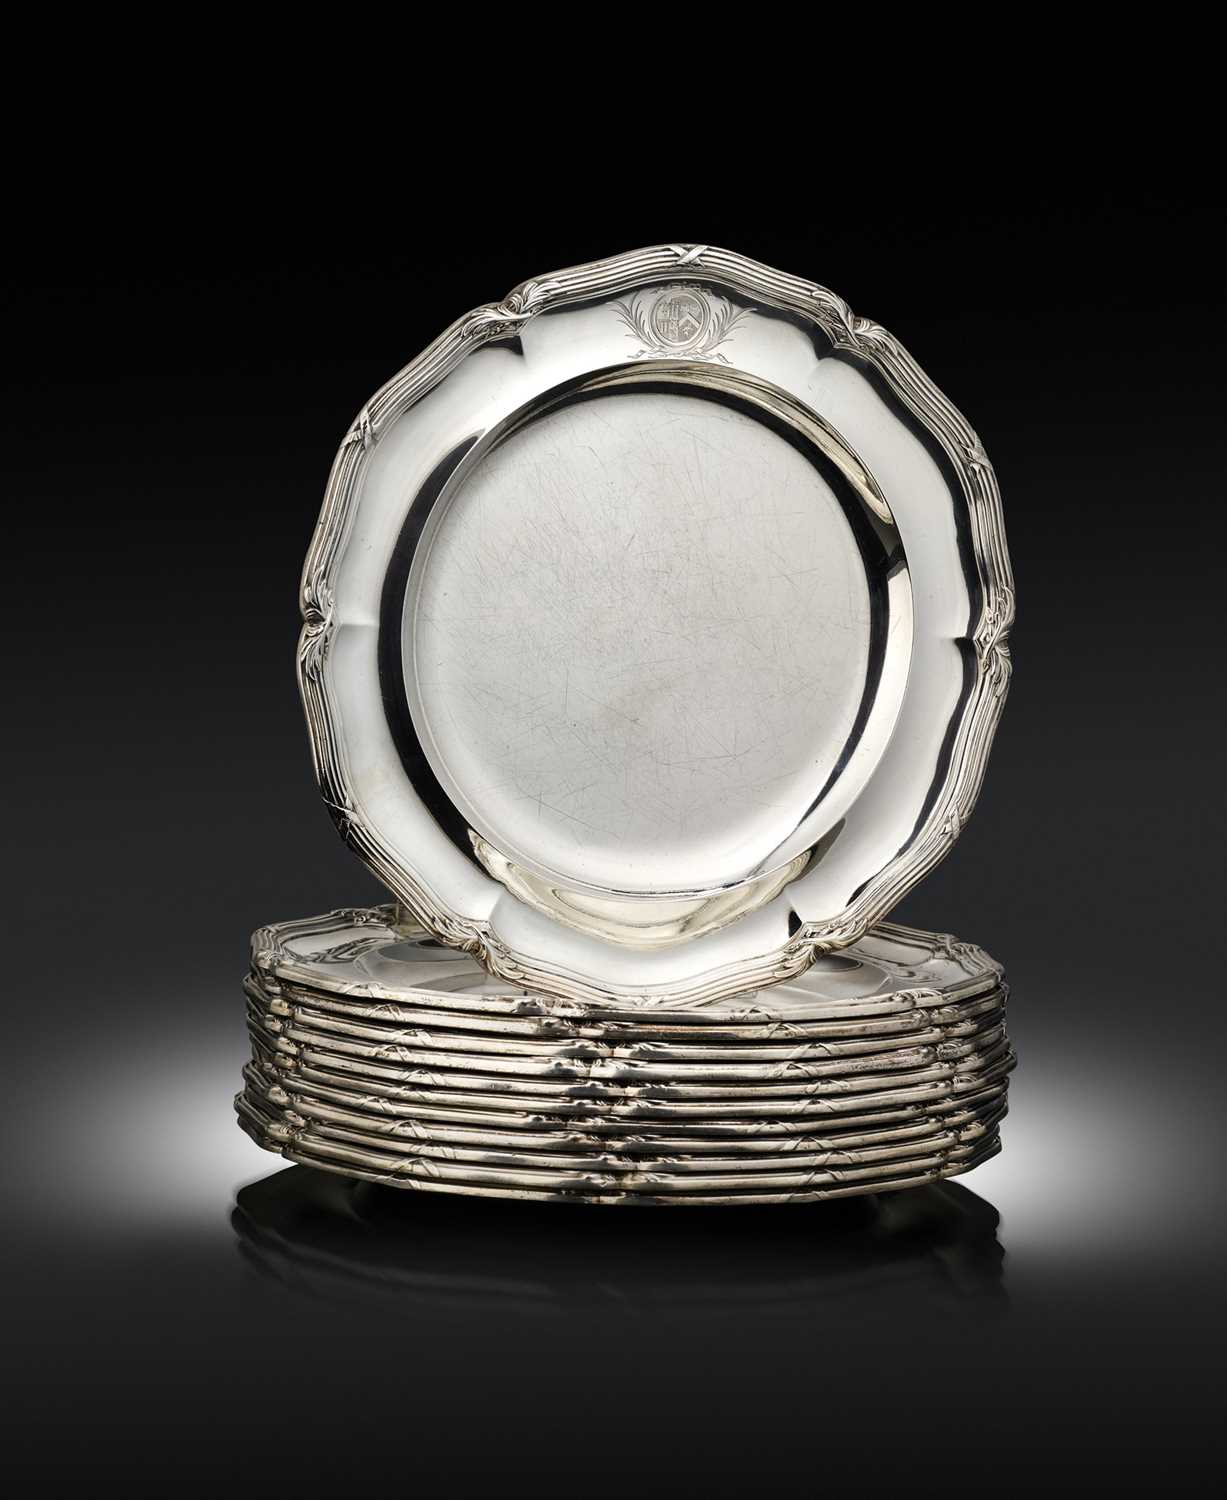 A set of twelve George III silver dinner plates from the Pelham service, by Paul Storr, London